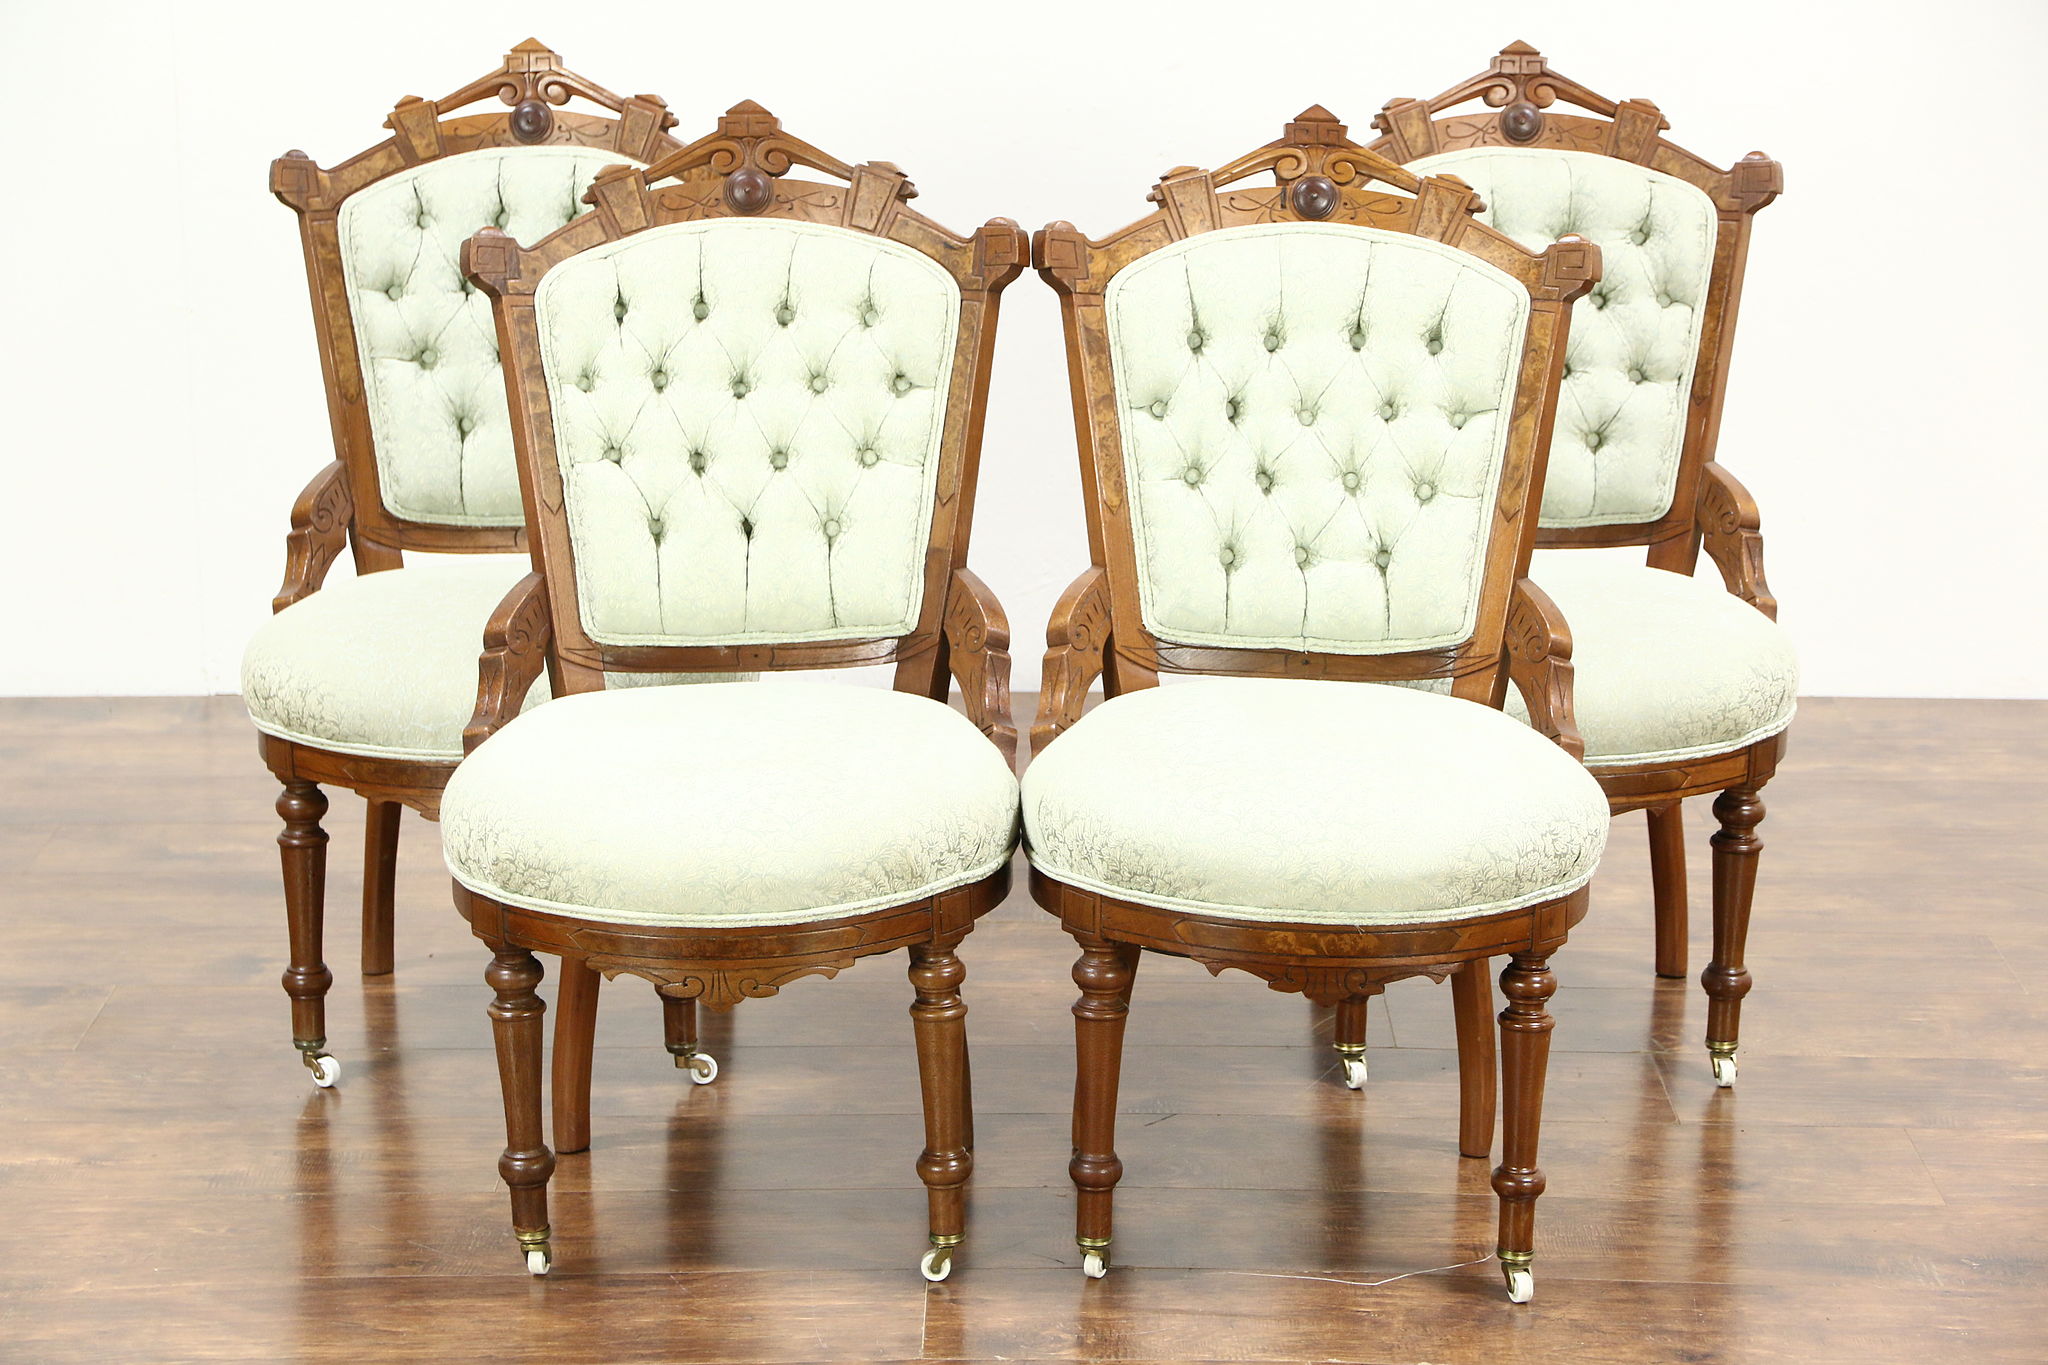 Sold Victorian Eastlake Antique Set Of 4 Walnut Game Breakfast Or Parlor Chairs Harp Gallery Antiques Furniture,How To Bleach Clothes Fashion